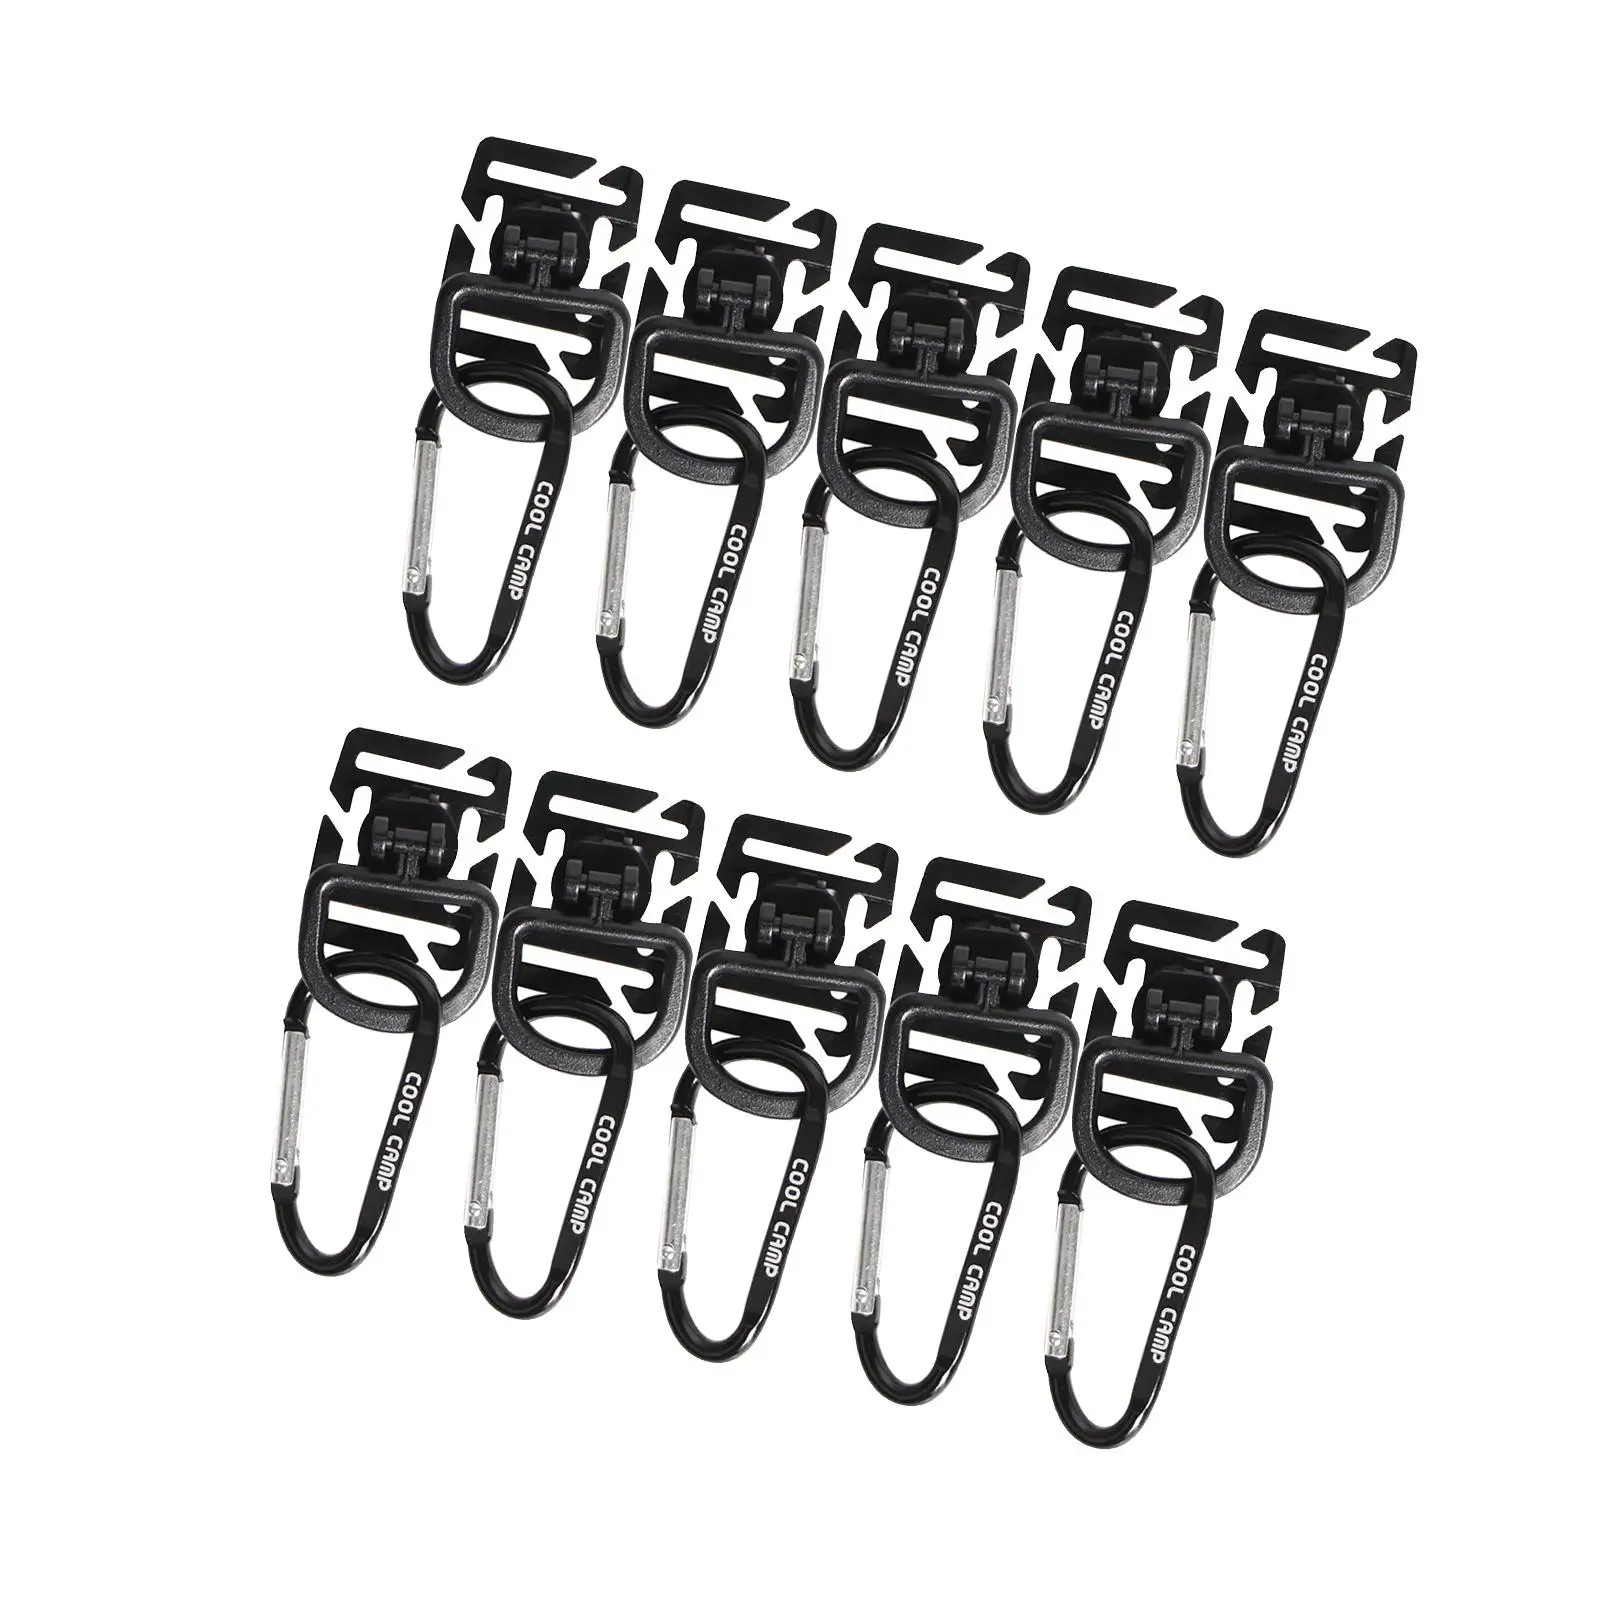 10x Outdoor Tent Clips Hook Tent Clamp Heavy Duty Carabiner Hook Canopy Clip for Mountaineering Camping Climbing Canopies Garden